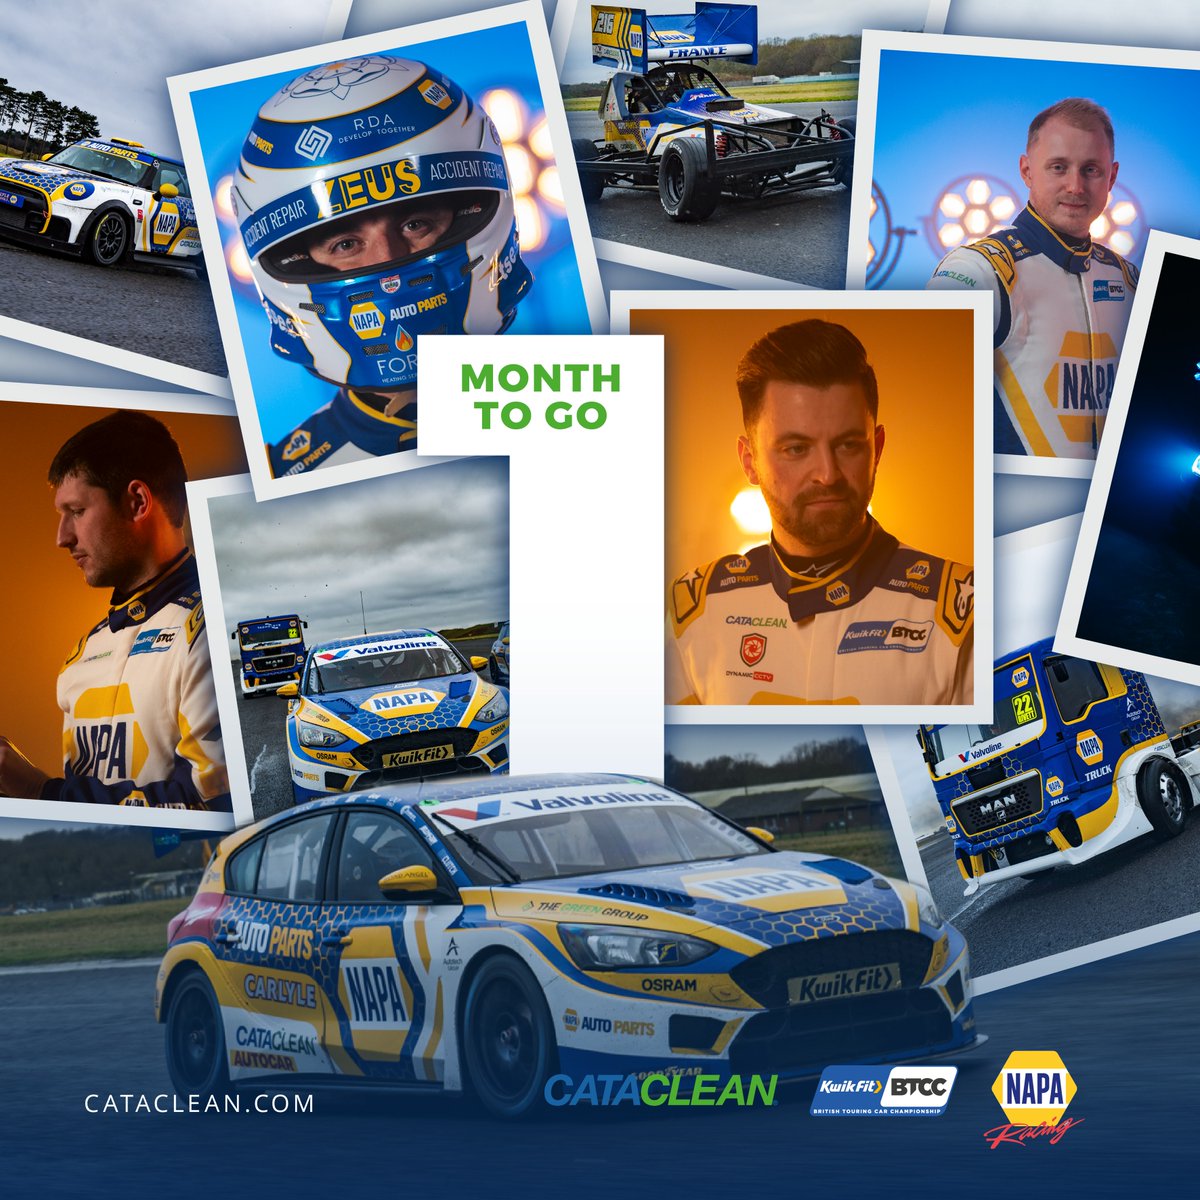 With just one month left until we hit the track for the 2024 BTCC Season, what are you most looking forward to? #Cataclean #motorsport #sponsorship #NAPA #NAPARacingUK #touringcars #EngineCleaning #FuelAdditive #emissions #enginesystem #catalyticconverter